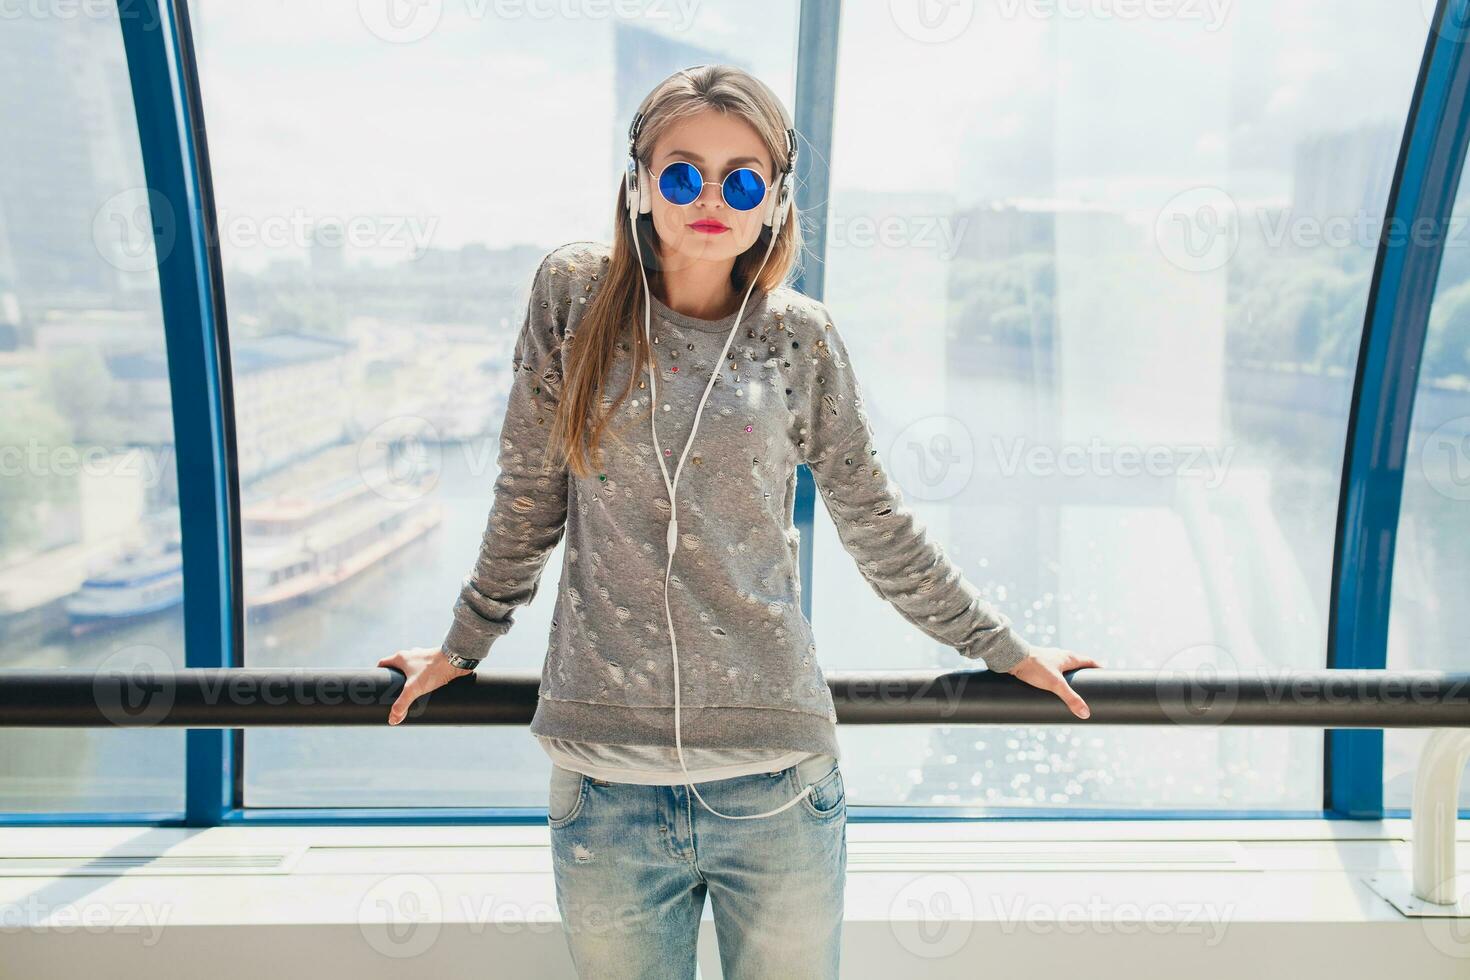 young hipster woman in casual outfit having fun listening to music photo